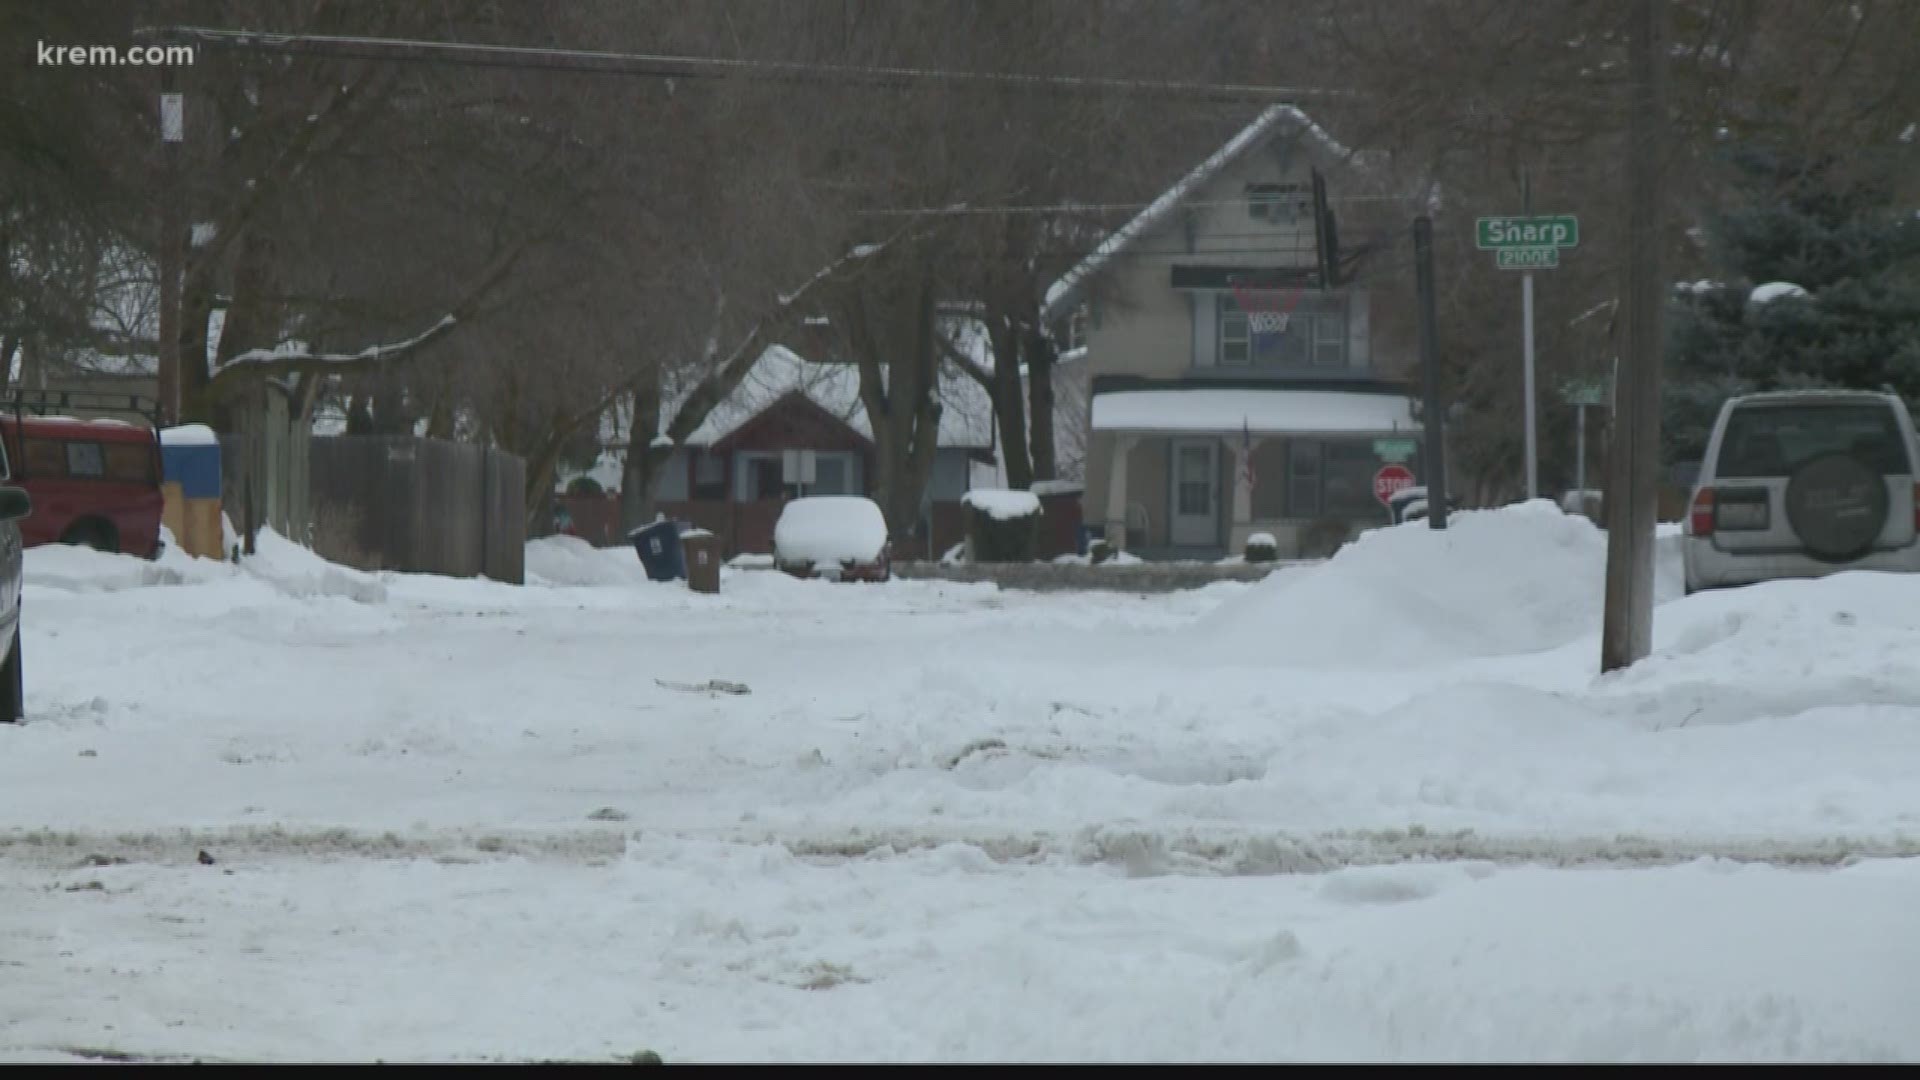 KREM 2's Alexa Block gets an update on the city's progress plowing the roads. She also asked some residents how they feel the city is doing when it comes to plowing.